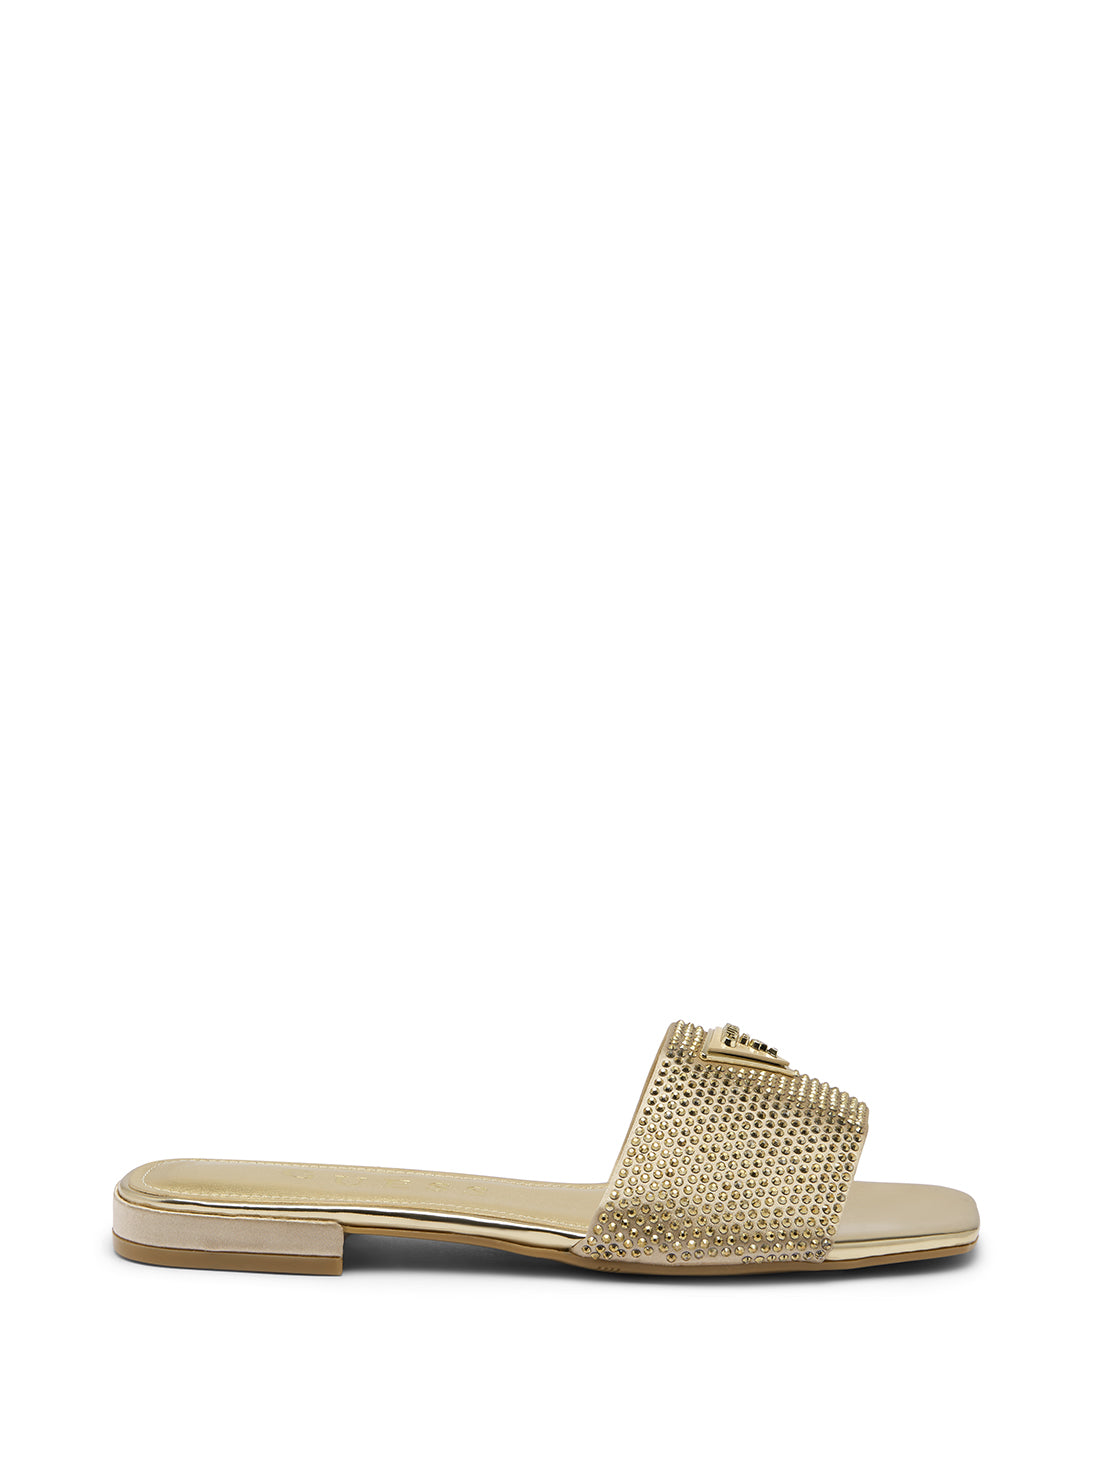 GUESS Gold Tamedi Slide Sandals side view